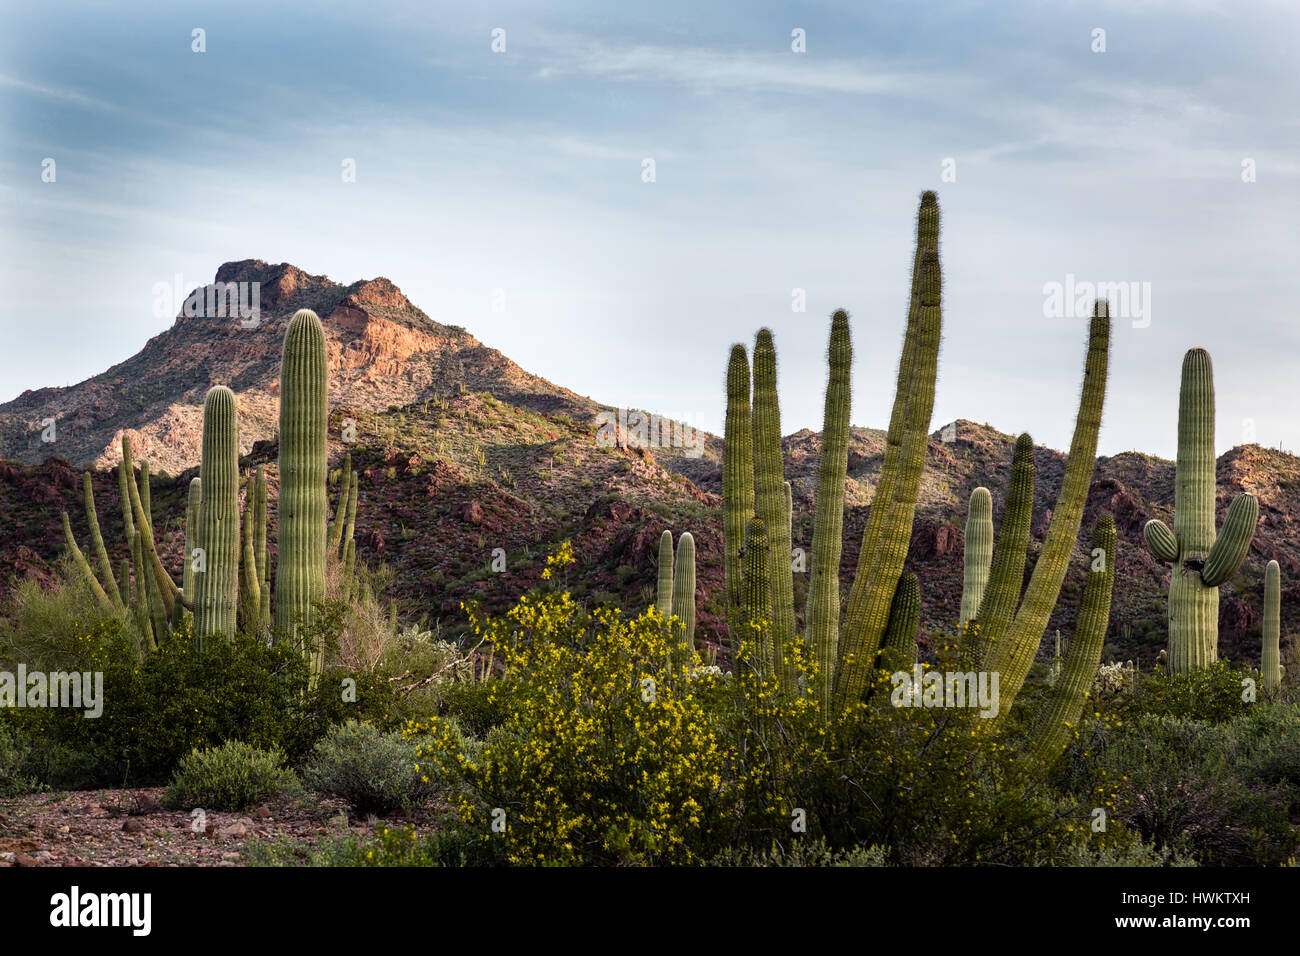 The morning dawns over the Sonoran Desert in Organ Pipe National Monument. Stock Photo